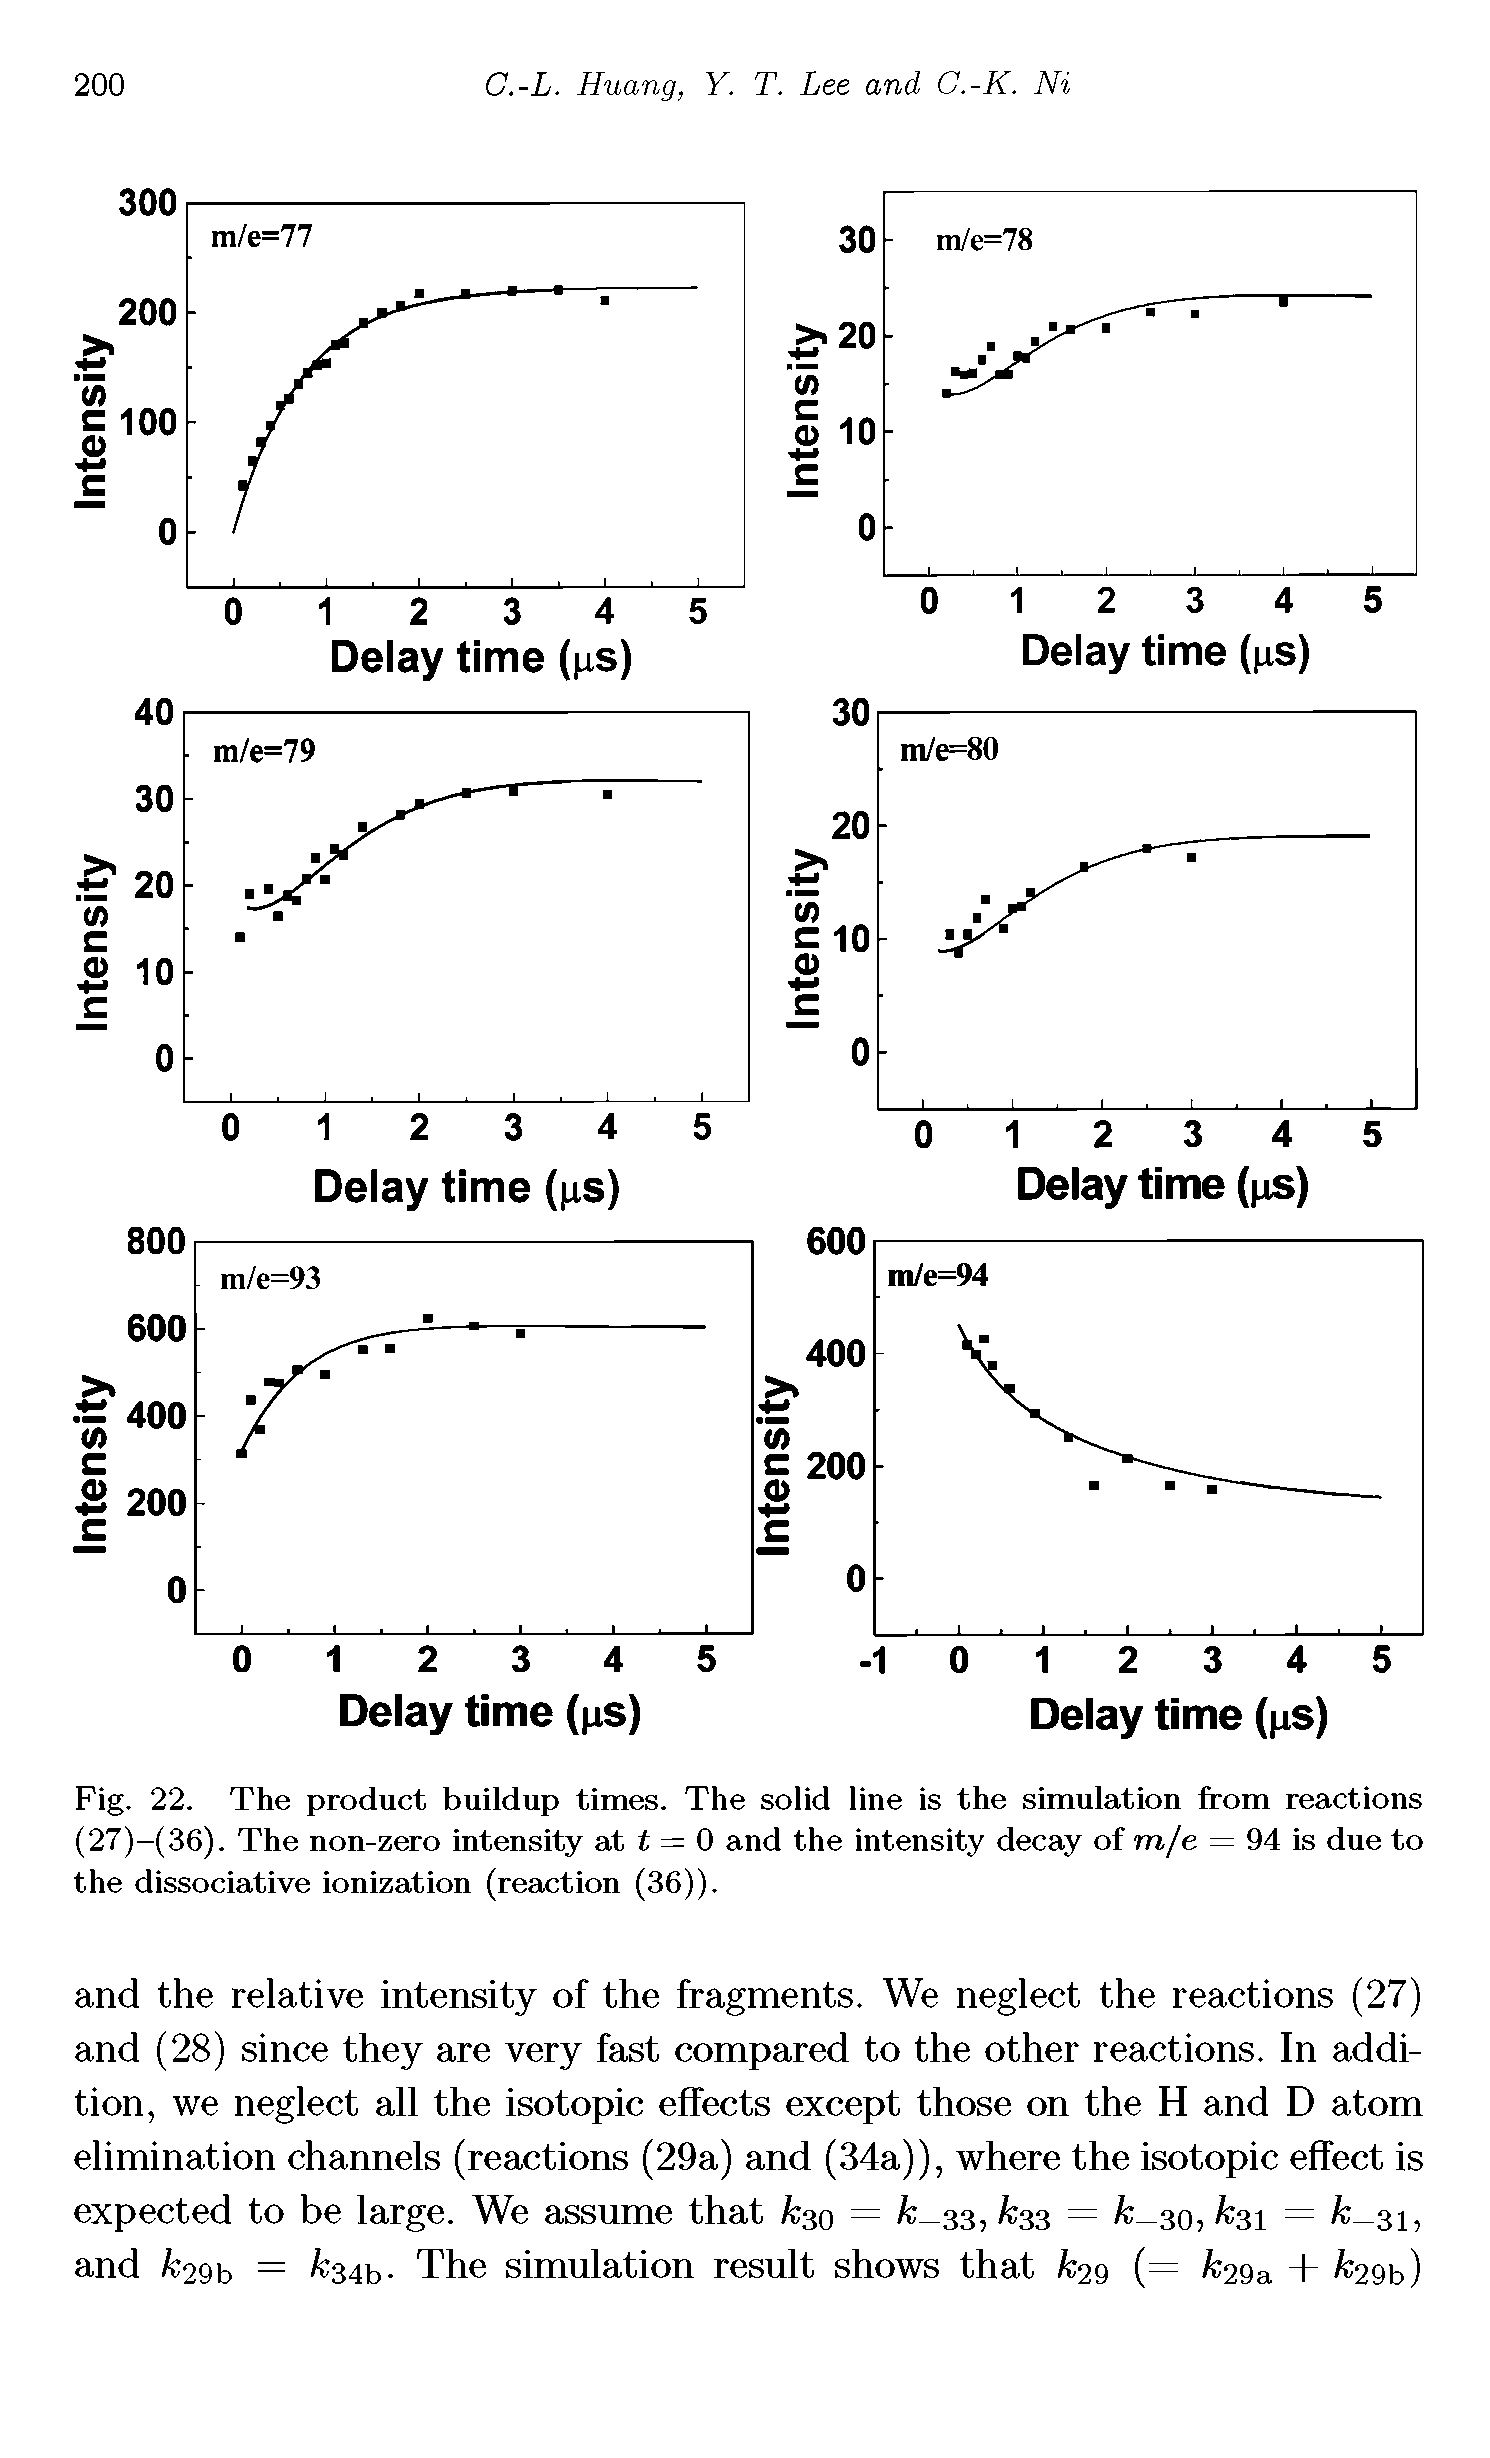 Fig. 22. The product buildup times. The solid line is the simulation from reactions (27)-(36). The non-zero intensity at I, - 0 and the intensity decay of mje = 94 is due to the dissociative ionization (reaction (36)).